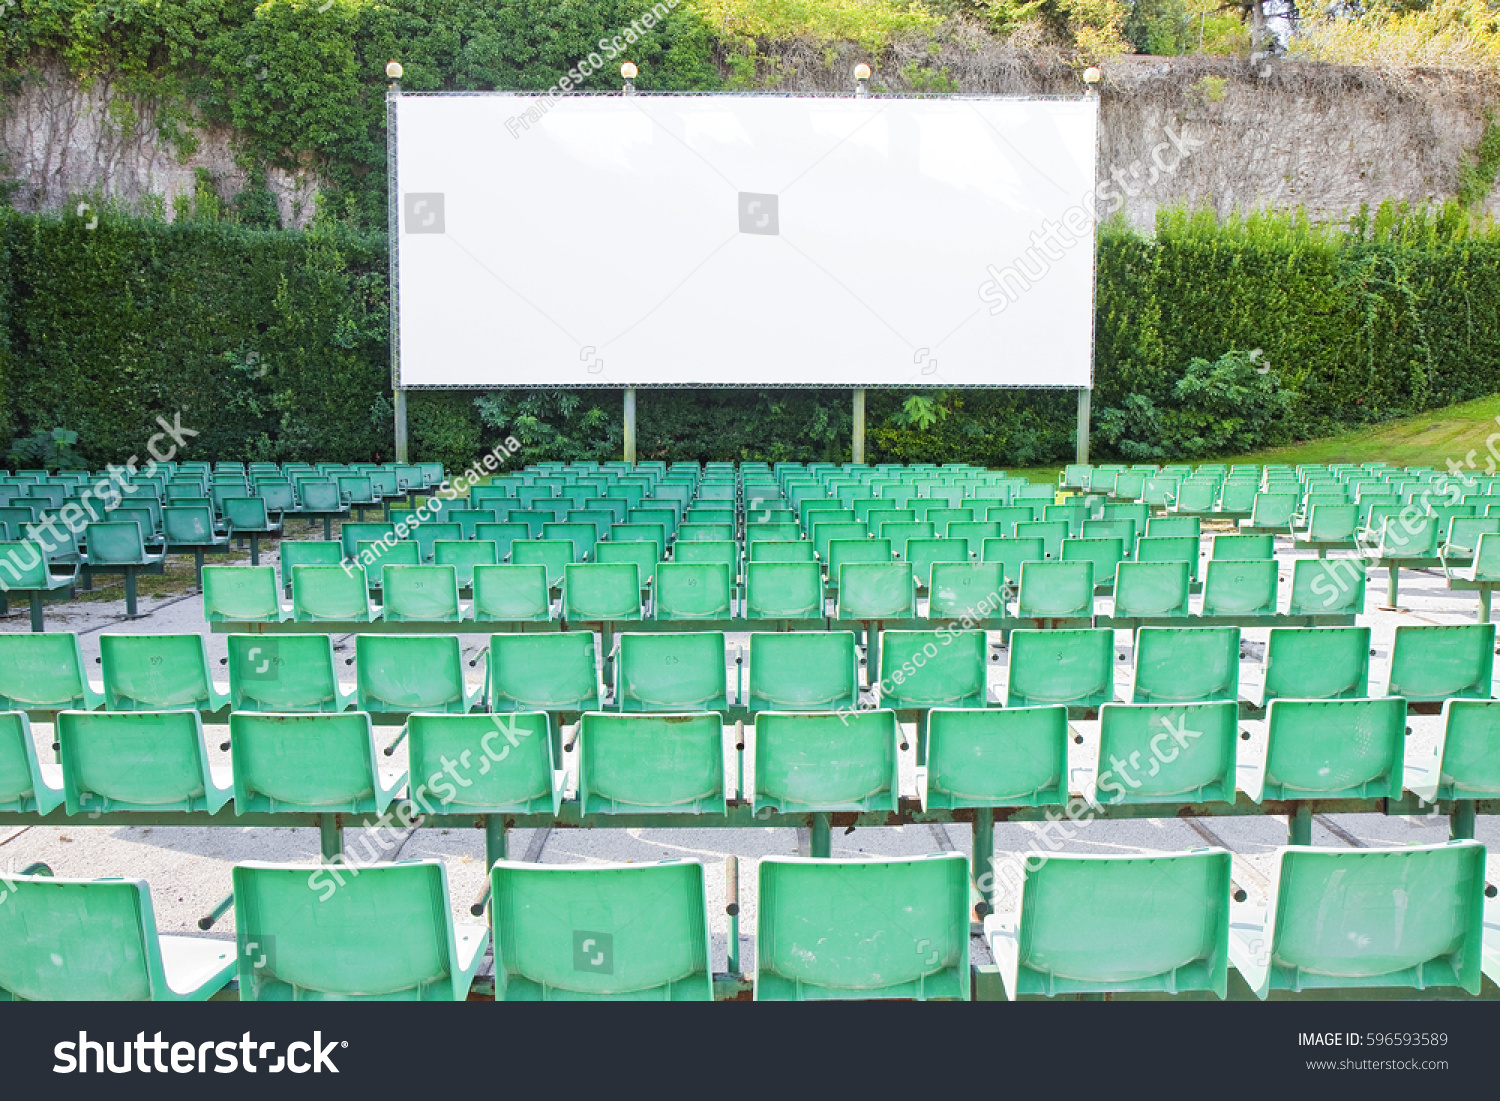 Outdoor cinema with white projection screen #596593589